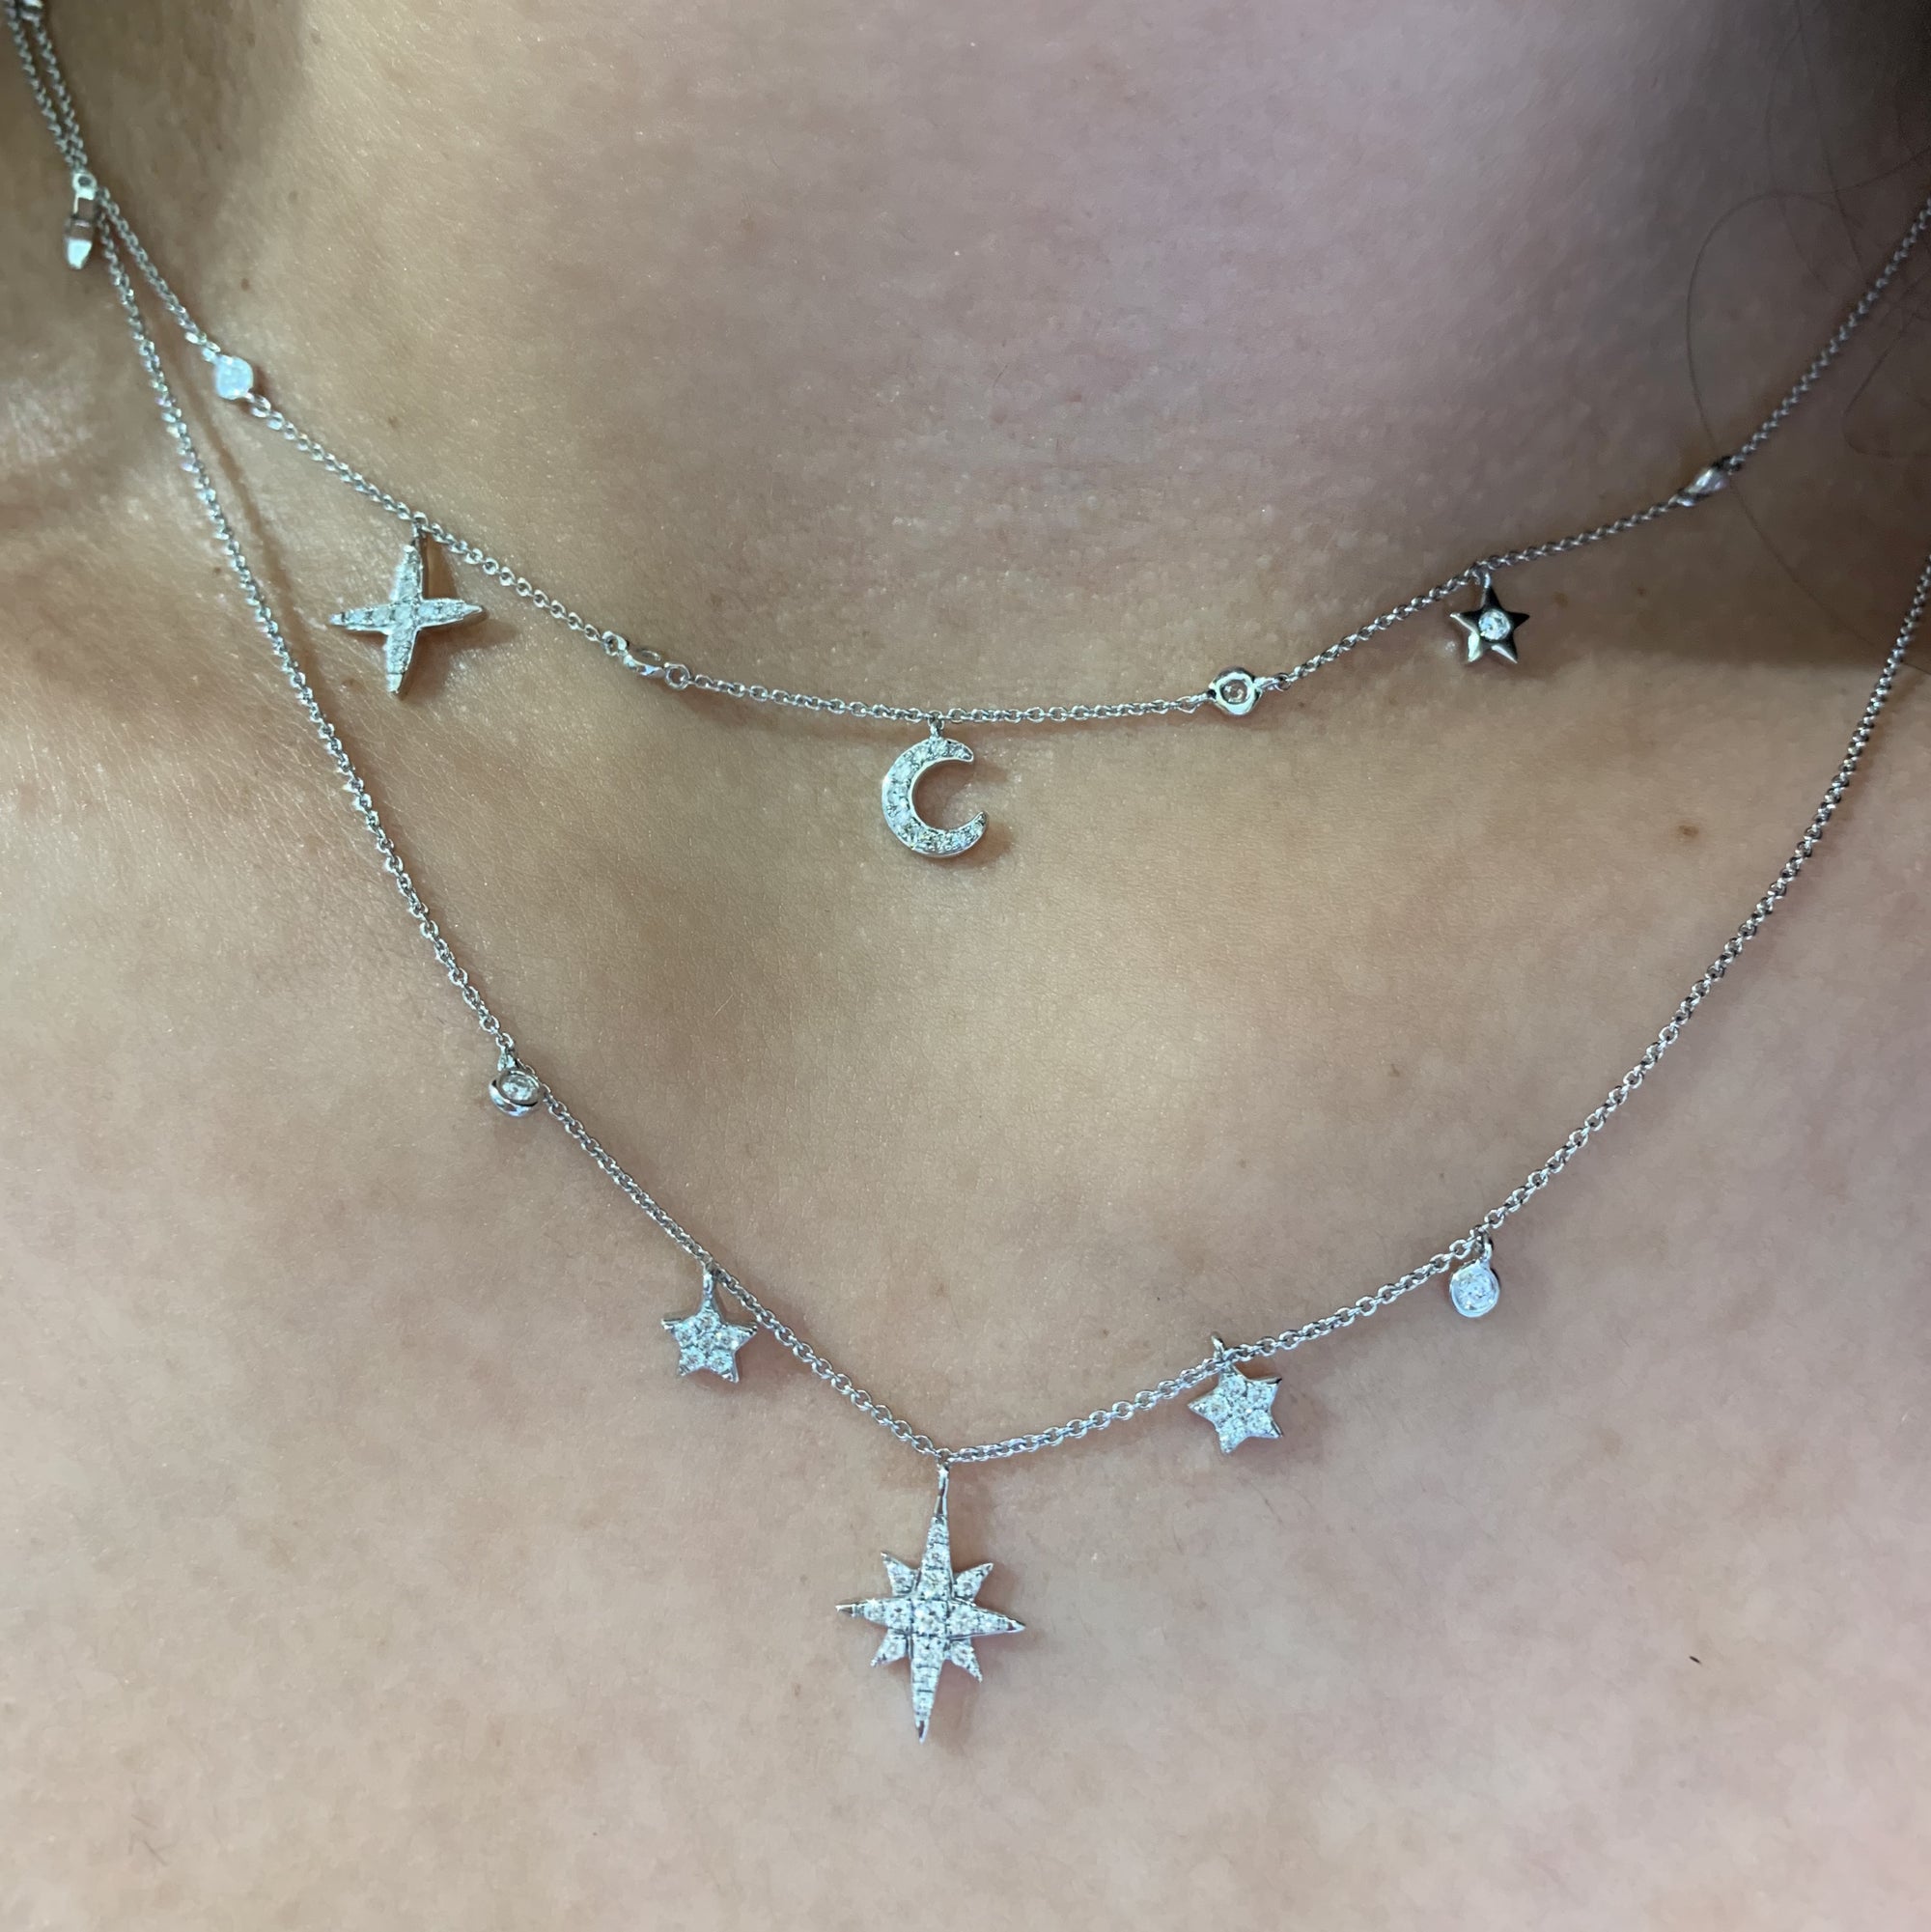 Diamond Celestial Showers Necklace in White, Yellow or Rose Gold - Talisman Collection Fine Jewelers